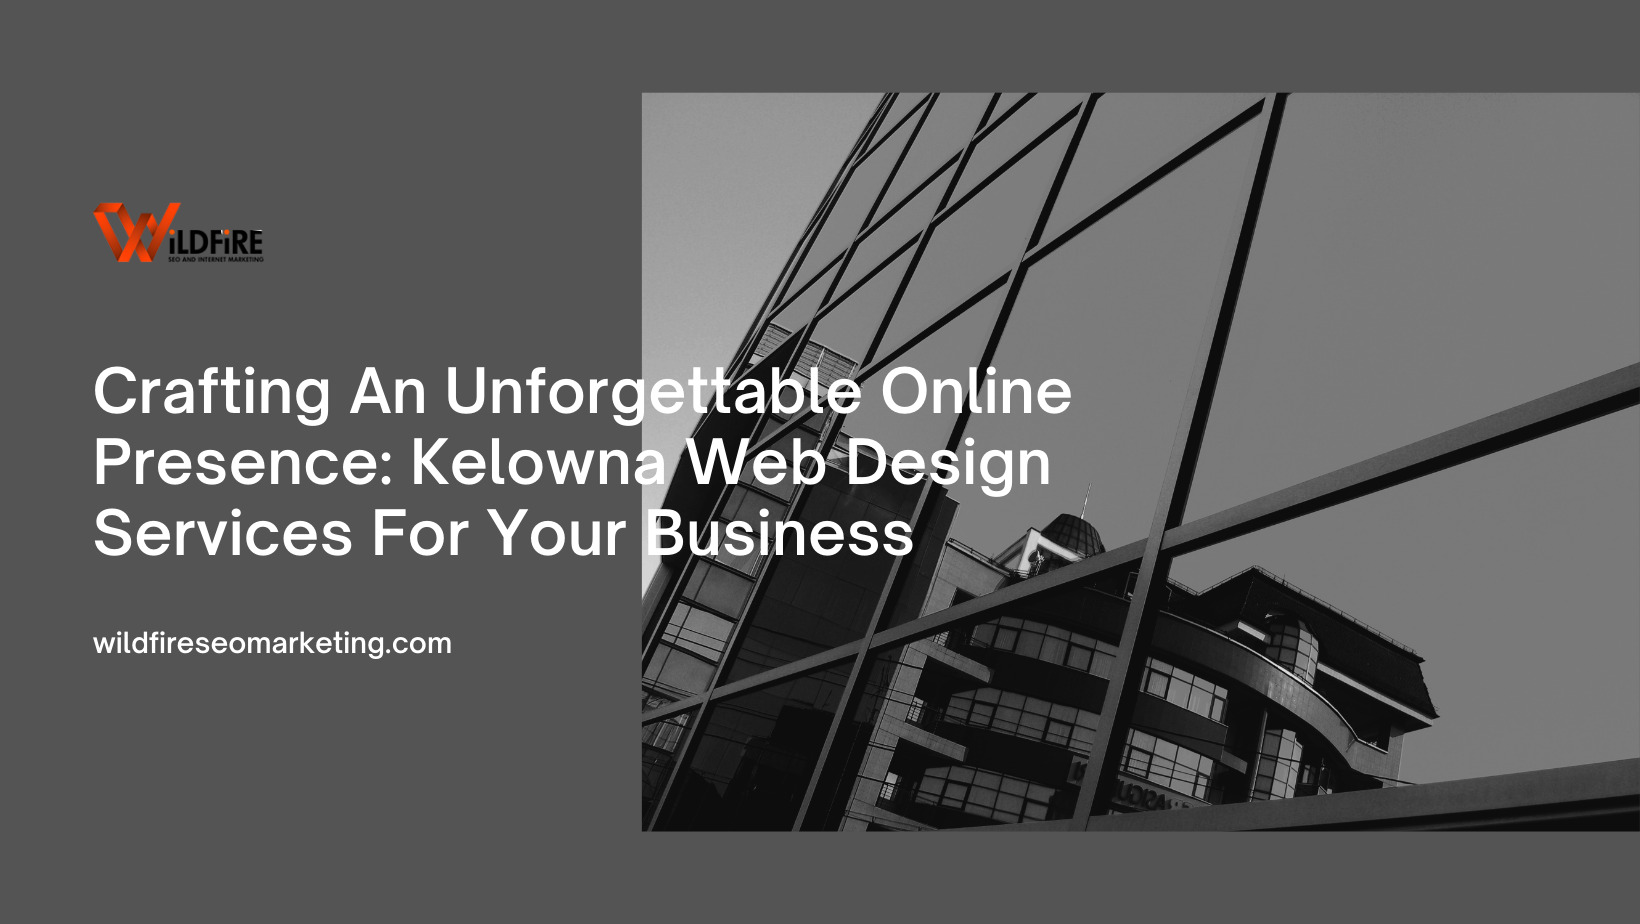 Crafting An Unforgettable Online Presence: Kelowna Web Design Services For Your Business